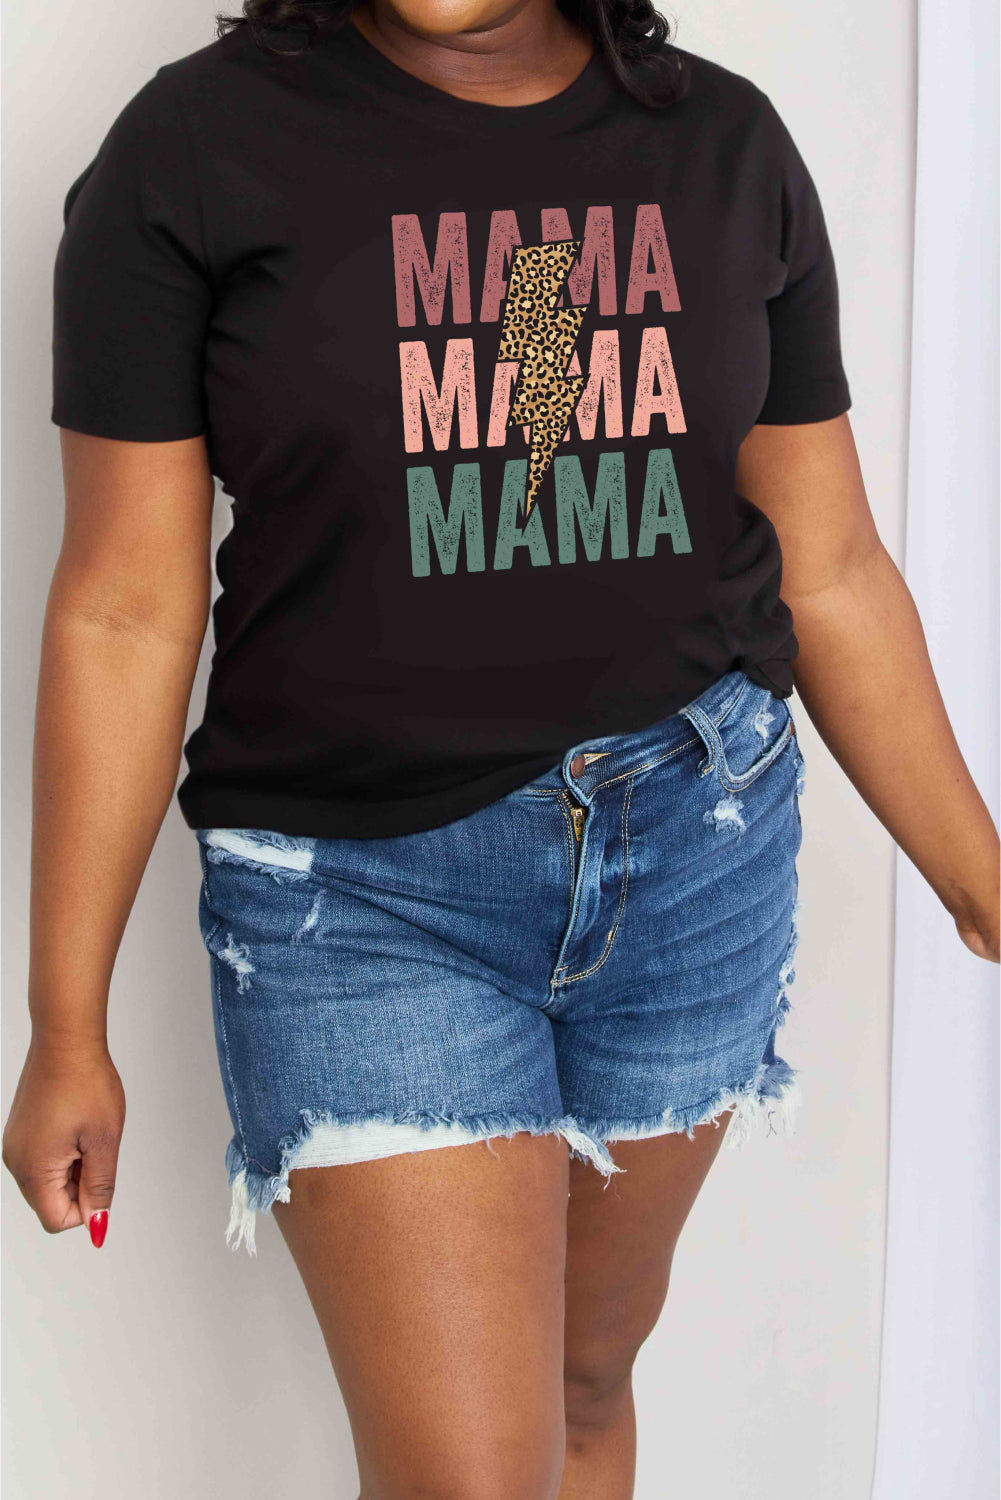 Simply Love Simply Love Full Size MAMA Graphic Cotton T-Shirt